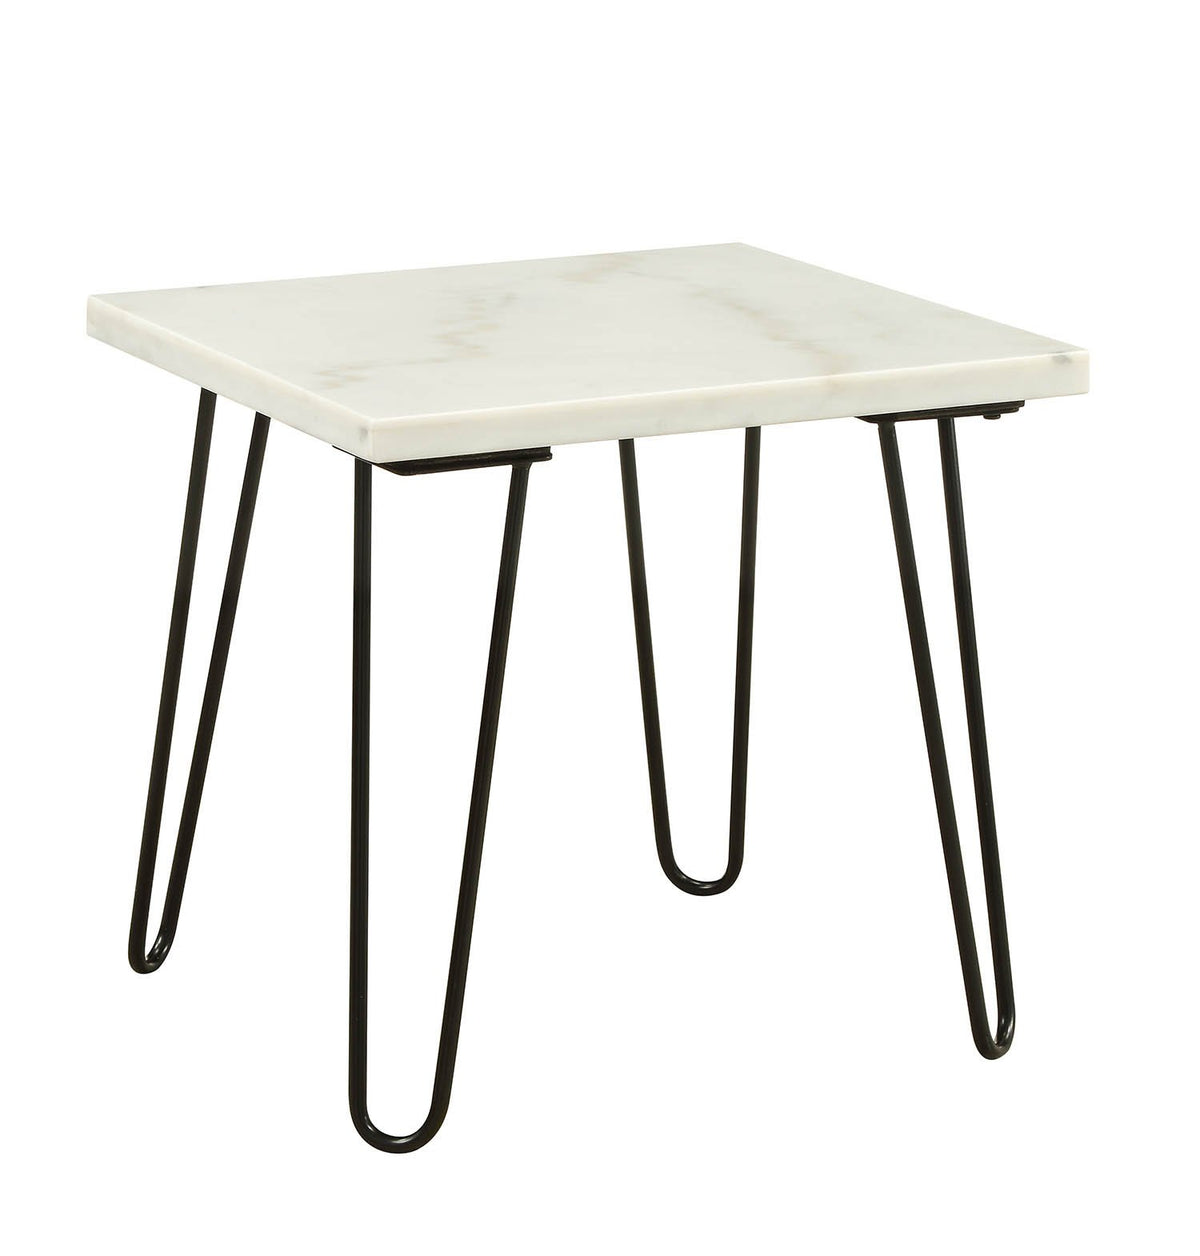 Marble Top End Table with Metal Hairpin Legs, White and Black - BM196699